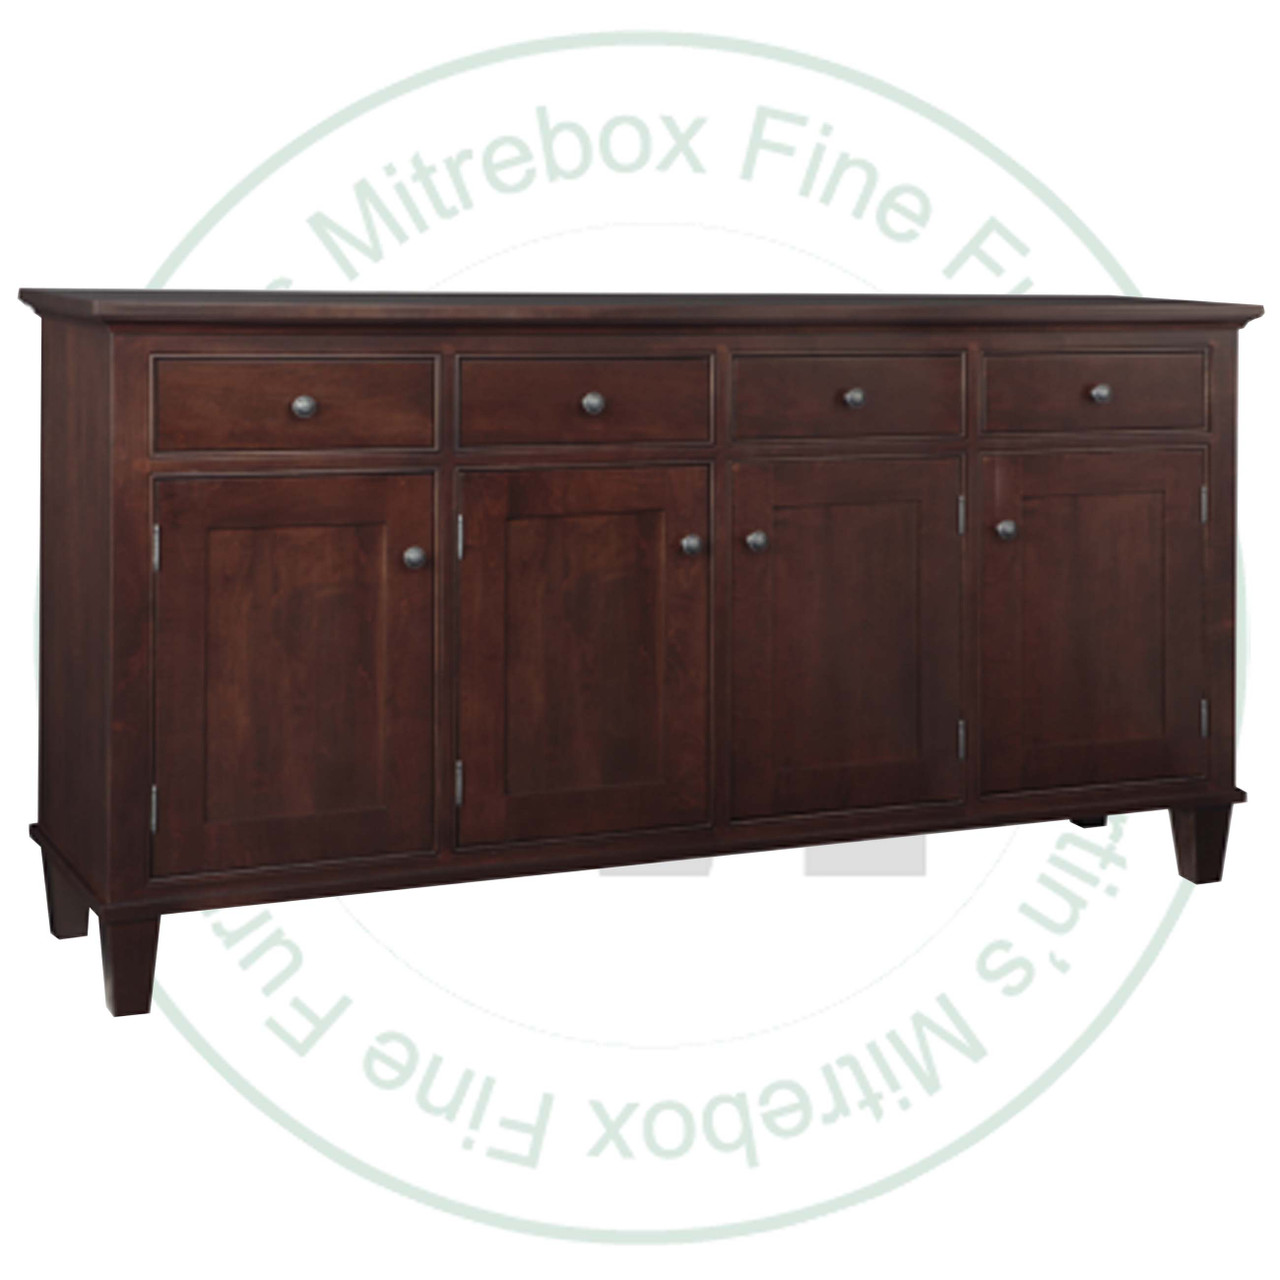 Oak Georgetown Sideboard 19.5'' Deep x 80'' Wide x 42'' High With 4 Wood Doors And 4 Drawers